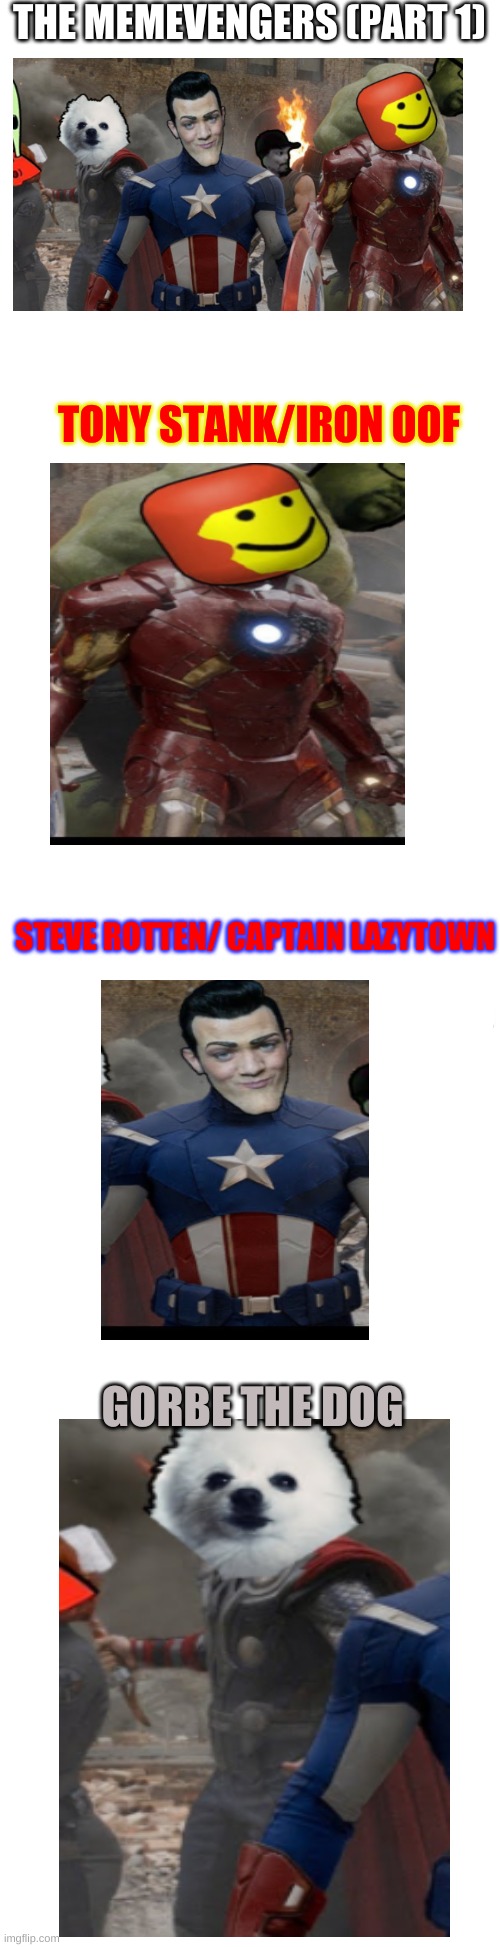 The Memevengers (part 1) | THE MEMEVENGERS (PART 1); TONY STANK/IRON OOF; STEVE ROTTEN/ CAPTAIN LAZYTOWN; GORBE THE DOG | image tagged in memes,avengers,memevengers,i'm running out of things to say here,bdgfbesdhehdrddbe,well that was random | made w/ Imgflip meme maker